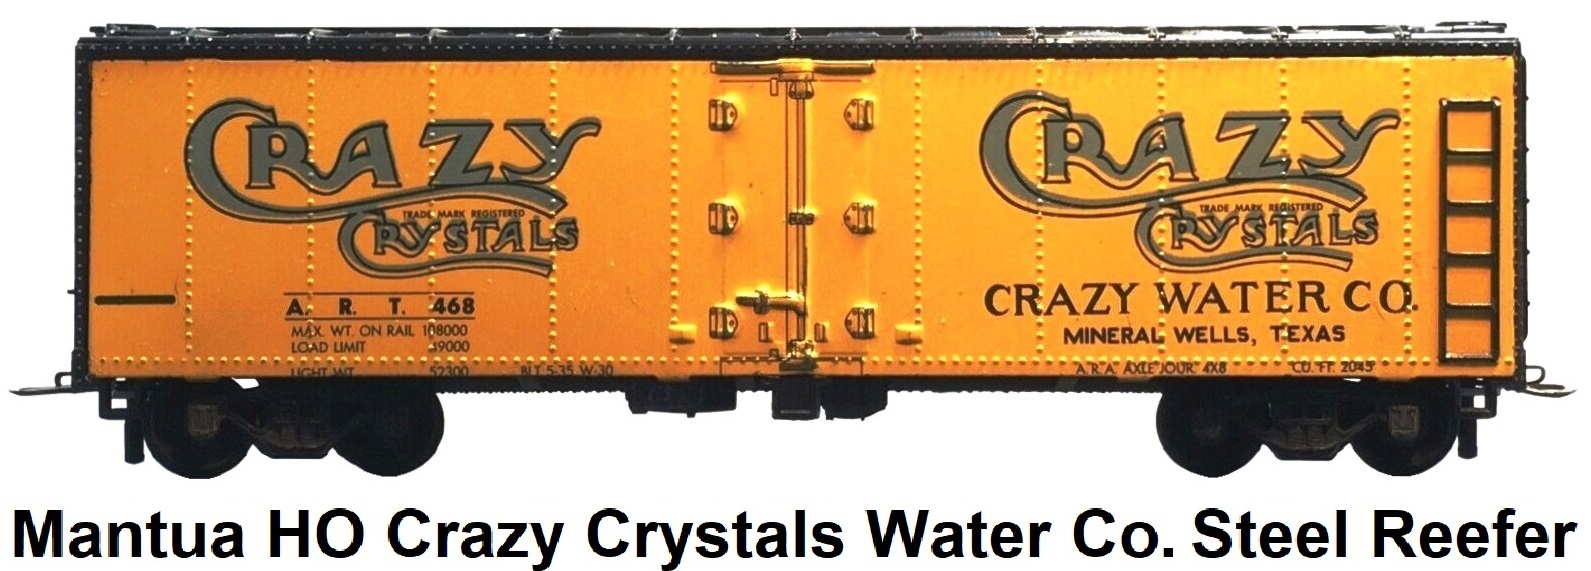 Mantua HO Crazy Crystals Water Company 40' steel reefer with pressed metal sides circa 1950's #313-B